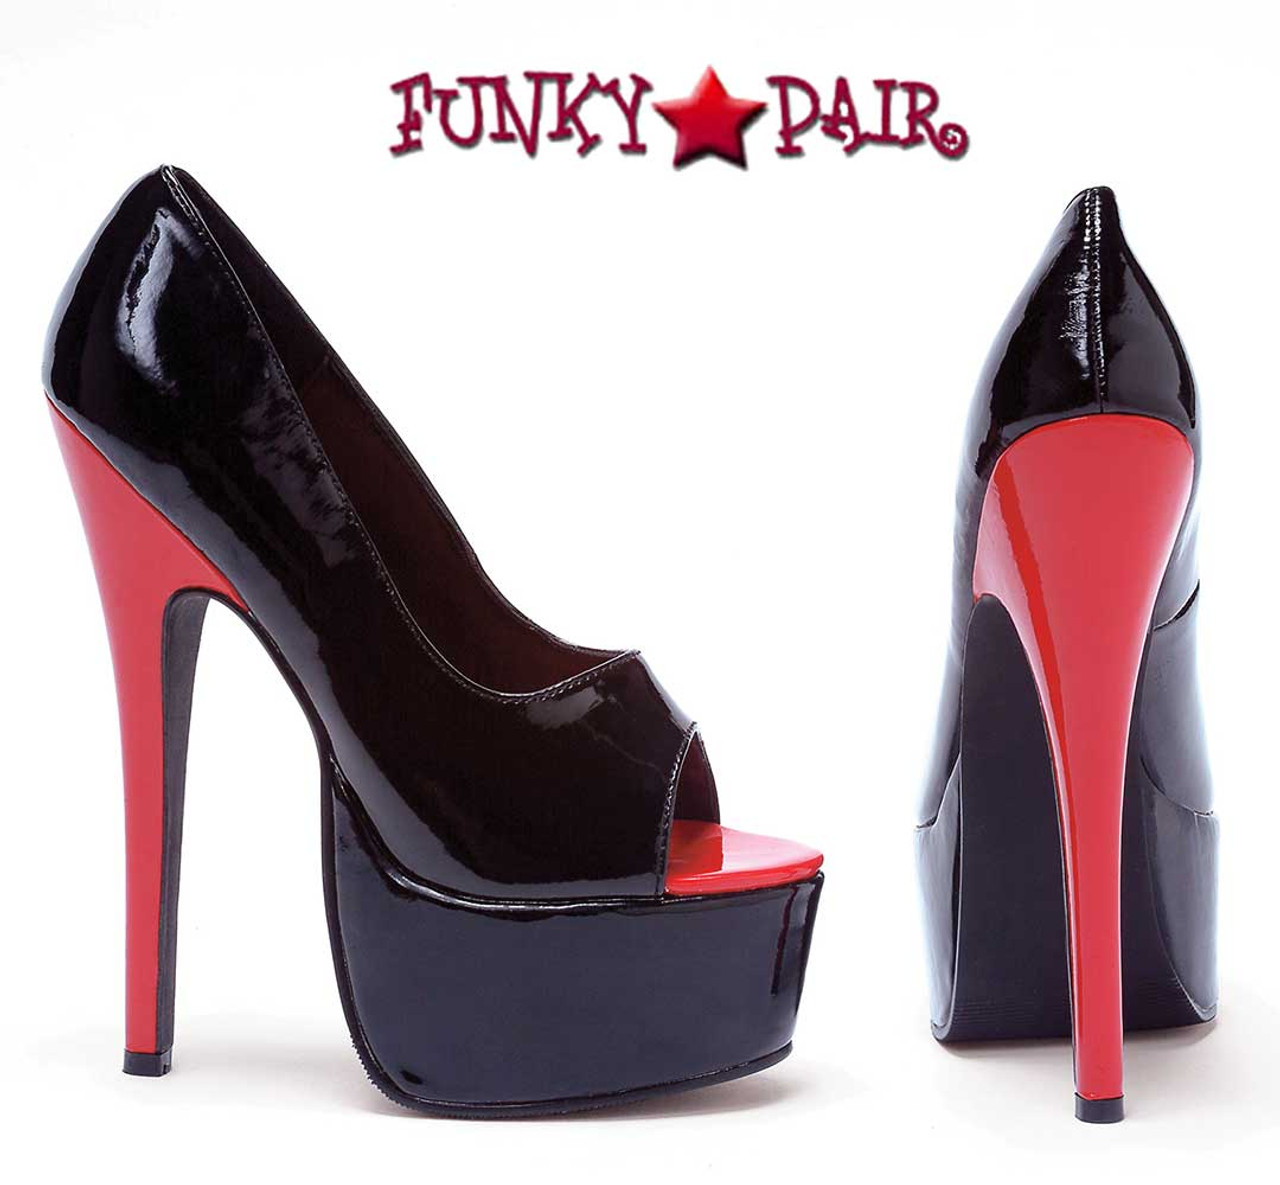 5 of the Highest Heeled Shoes Ever Made - Would You Wear Them? | Heels,  Funny shoes, Funky shoes